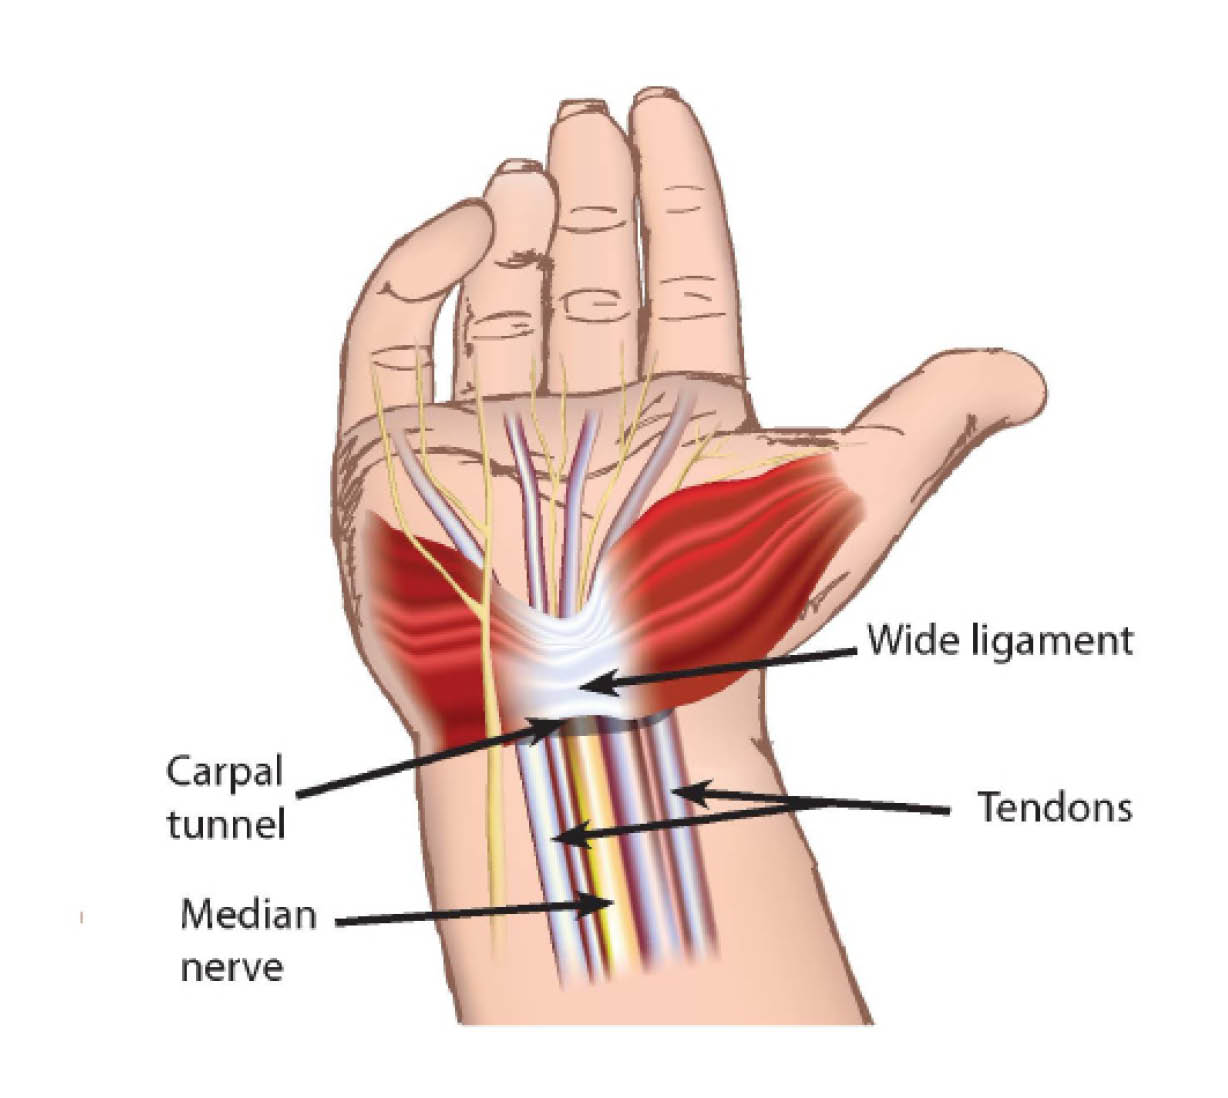 The carpal tunnel, and its surrounding ligaments, nerves, and tendons